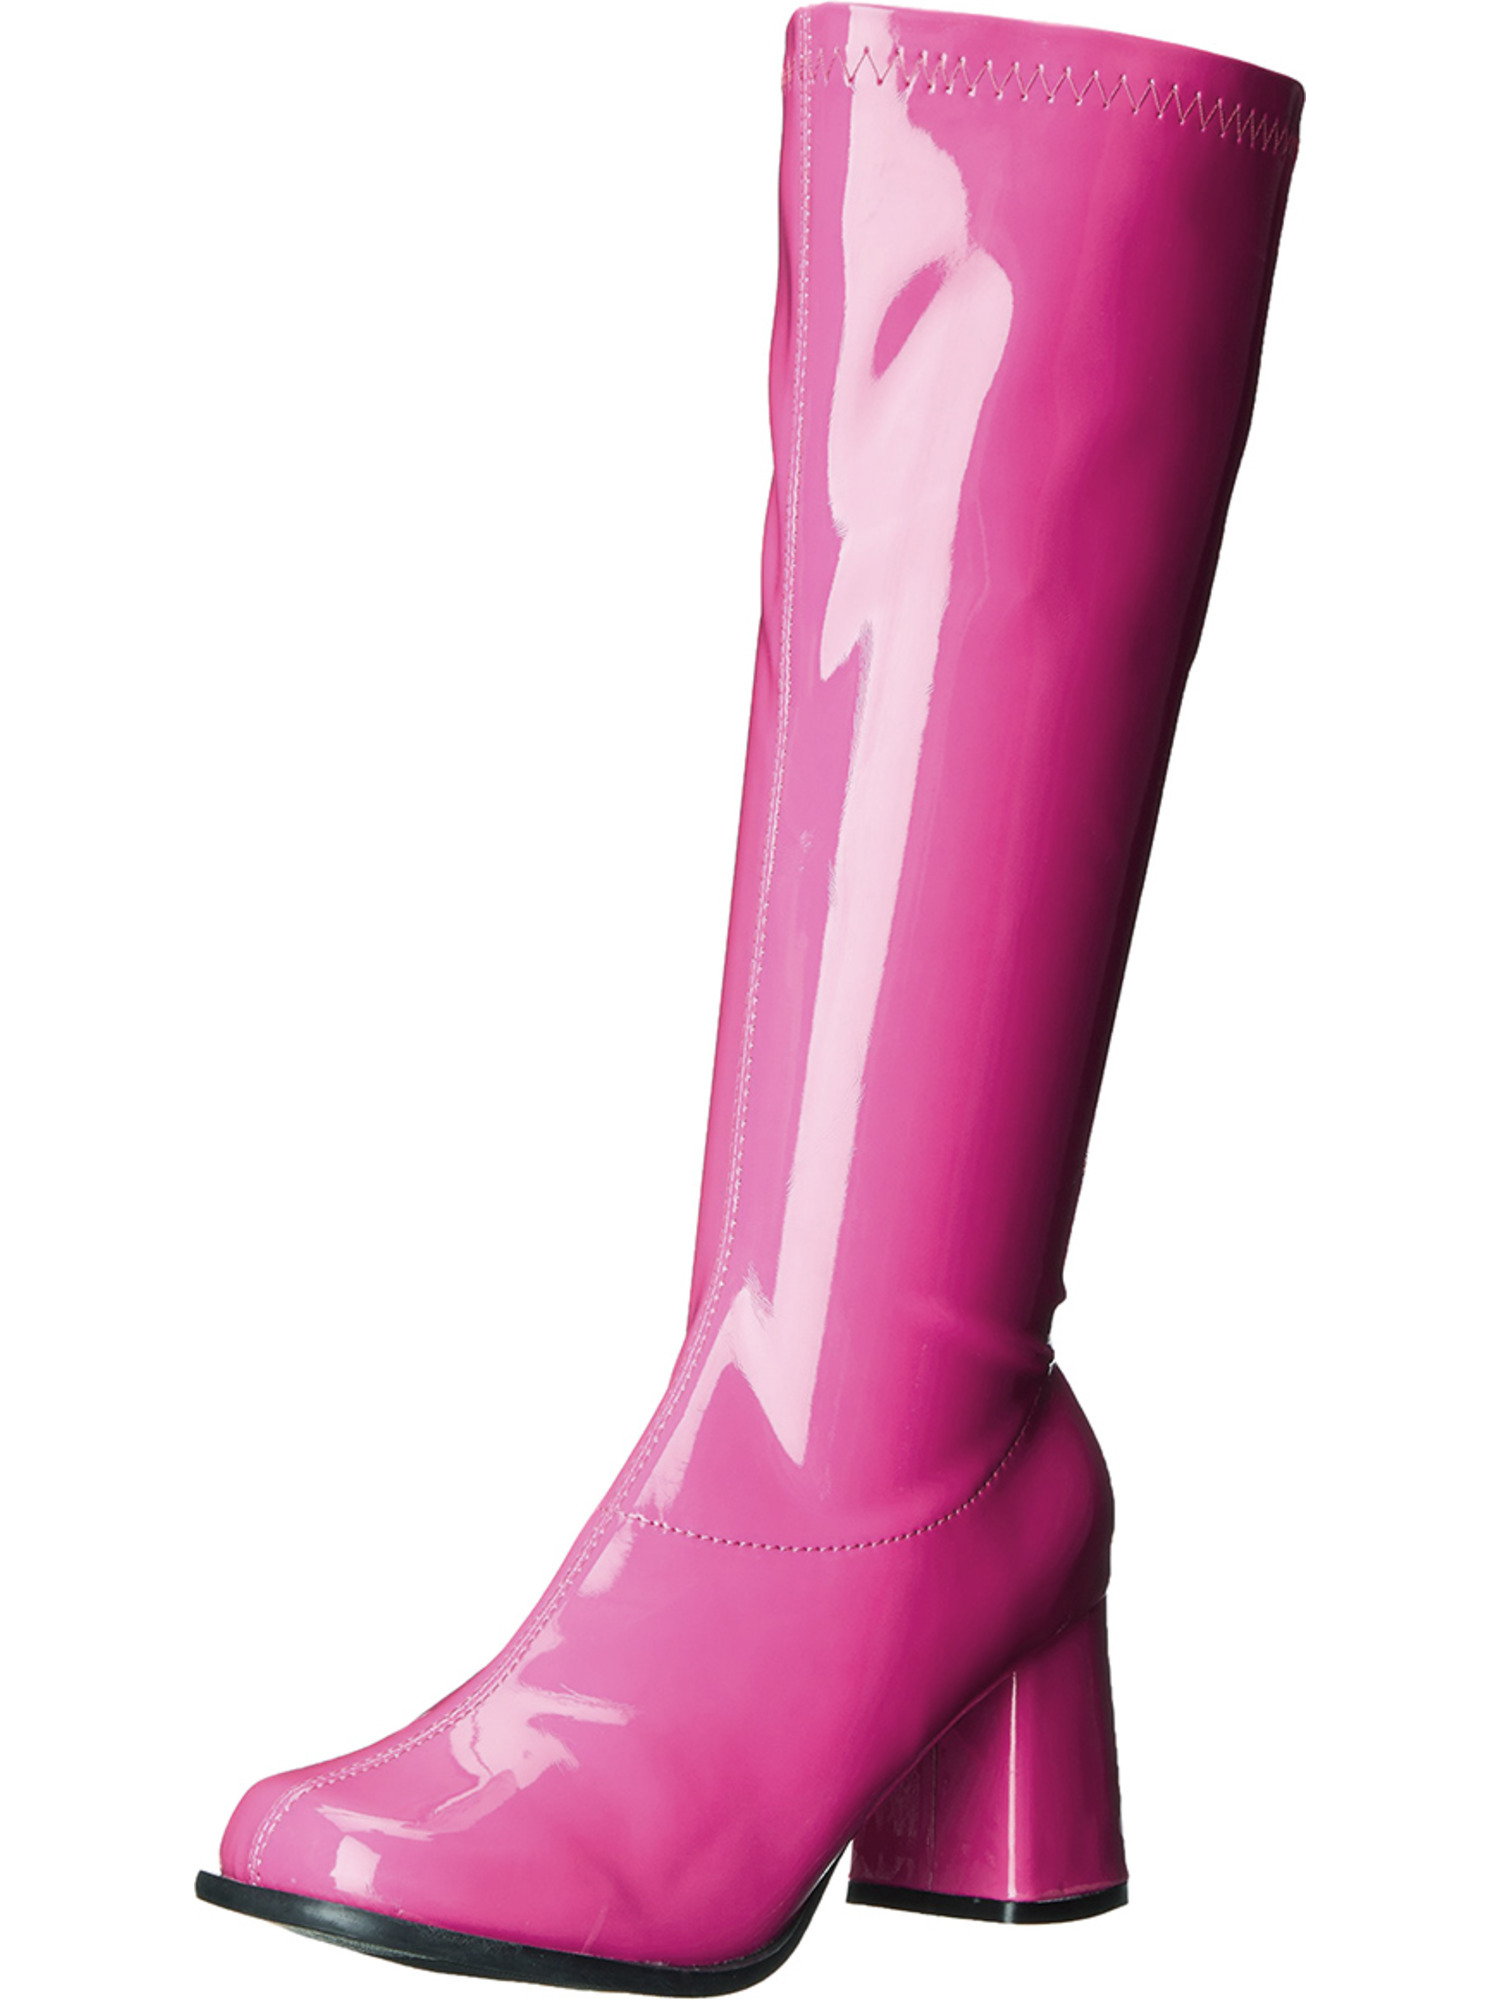 Inch Women's Sexy Gogo Boots Knee High 